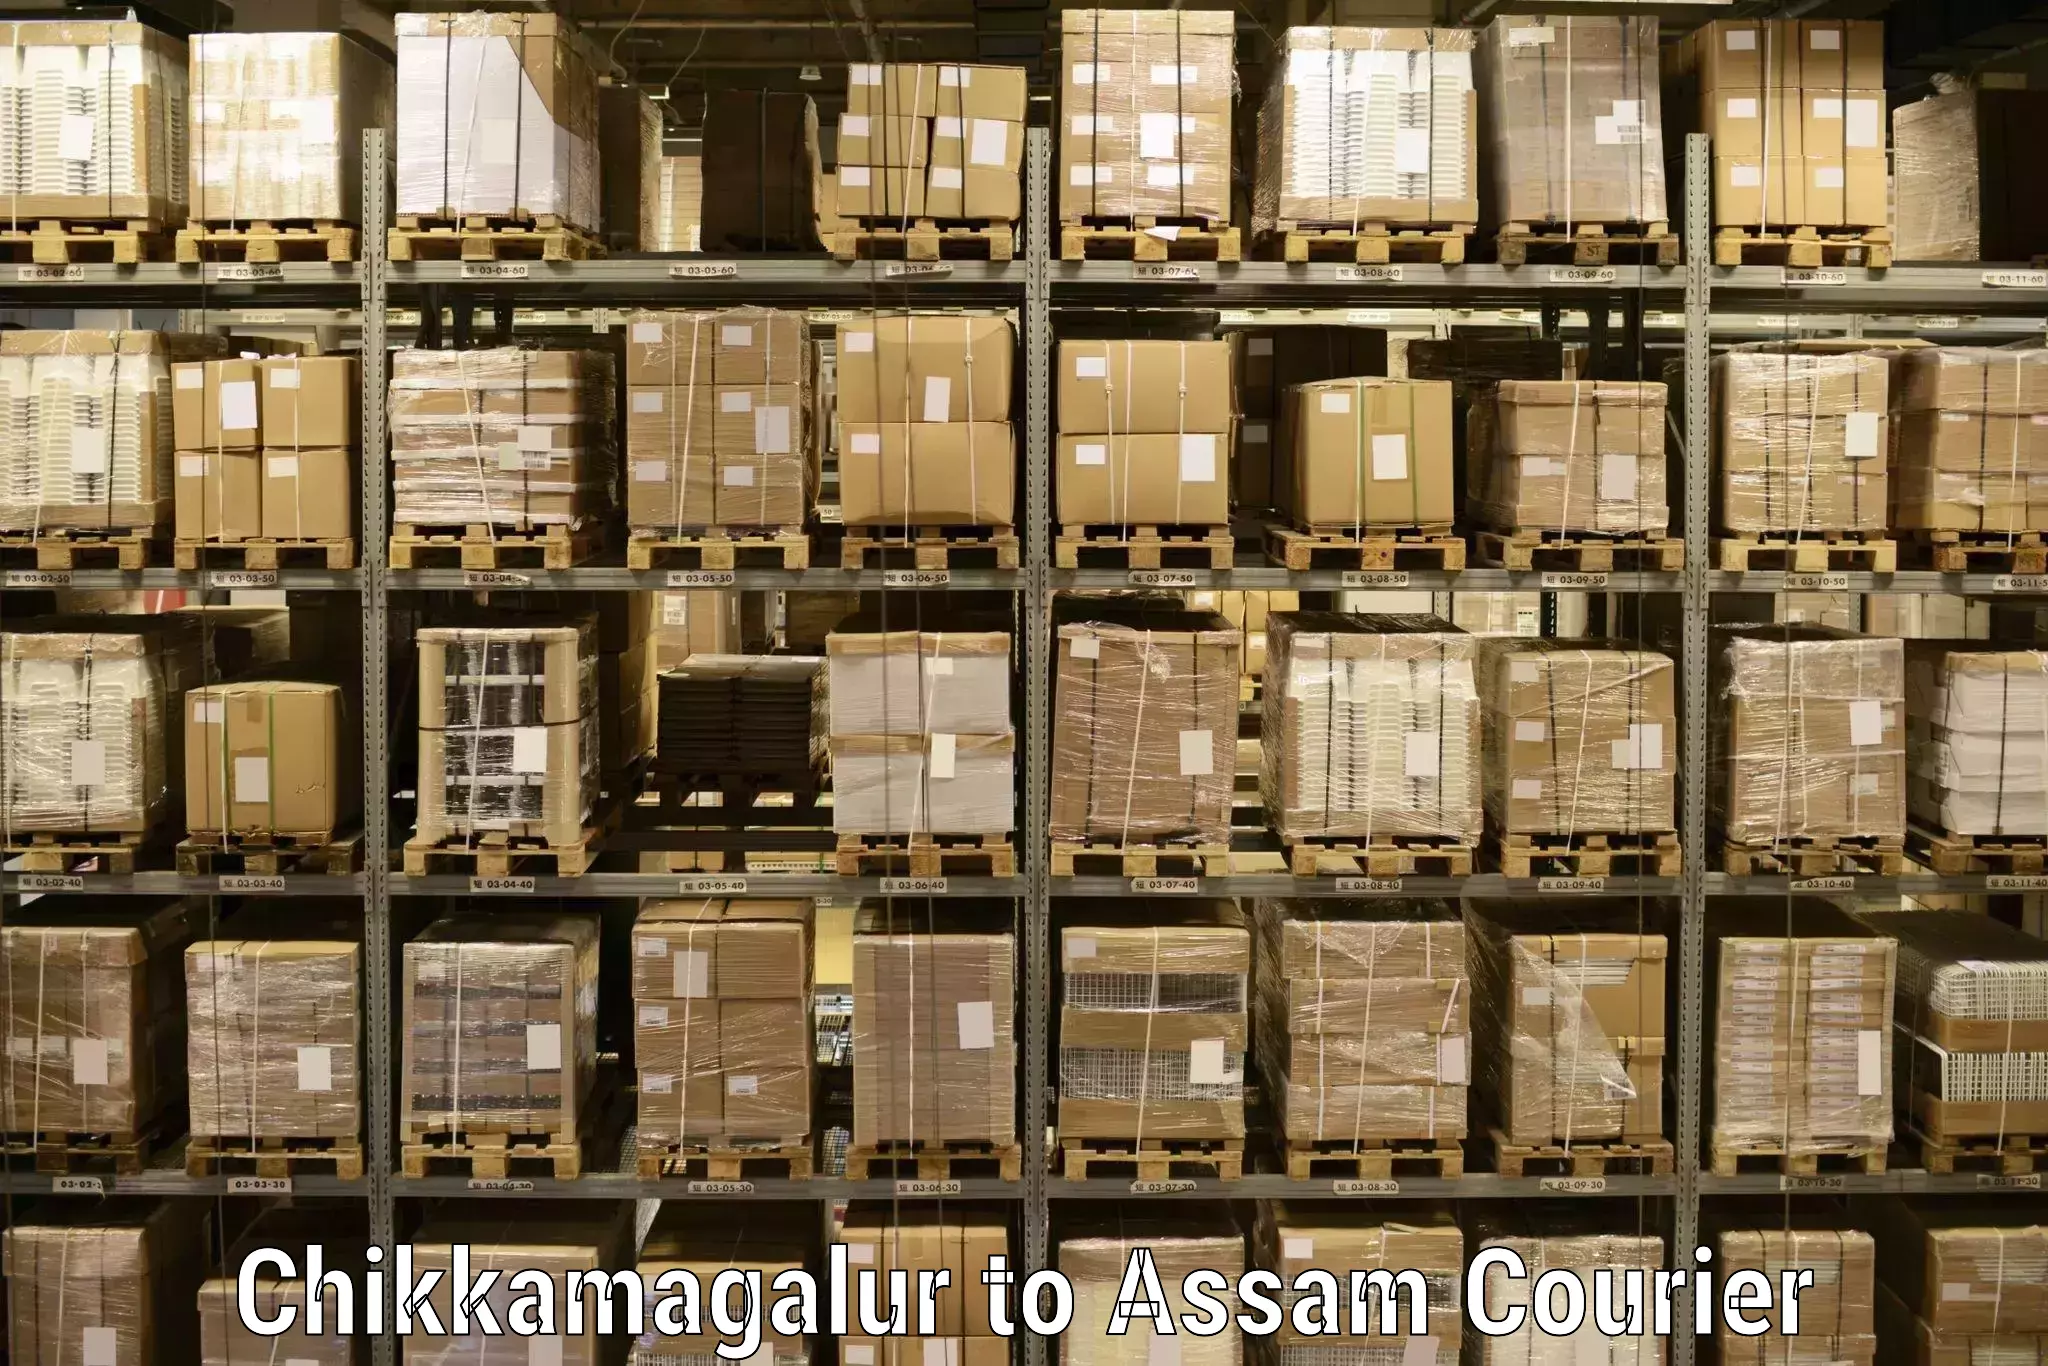 Easy access courier services Chikkamagalur to Assam